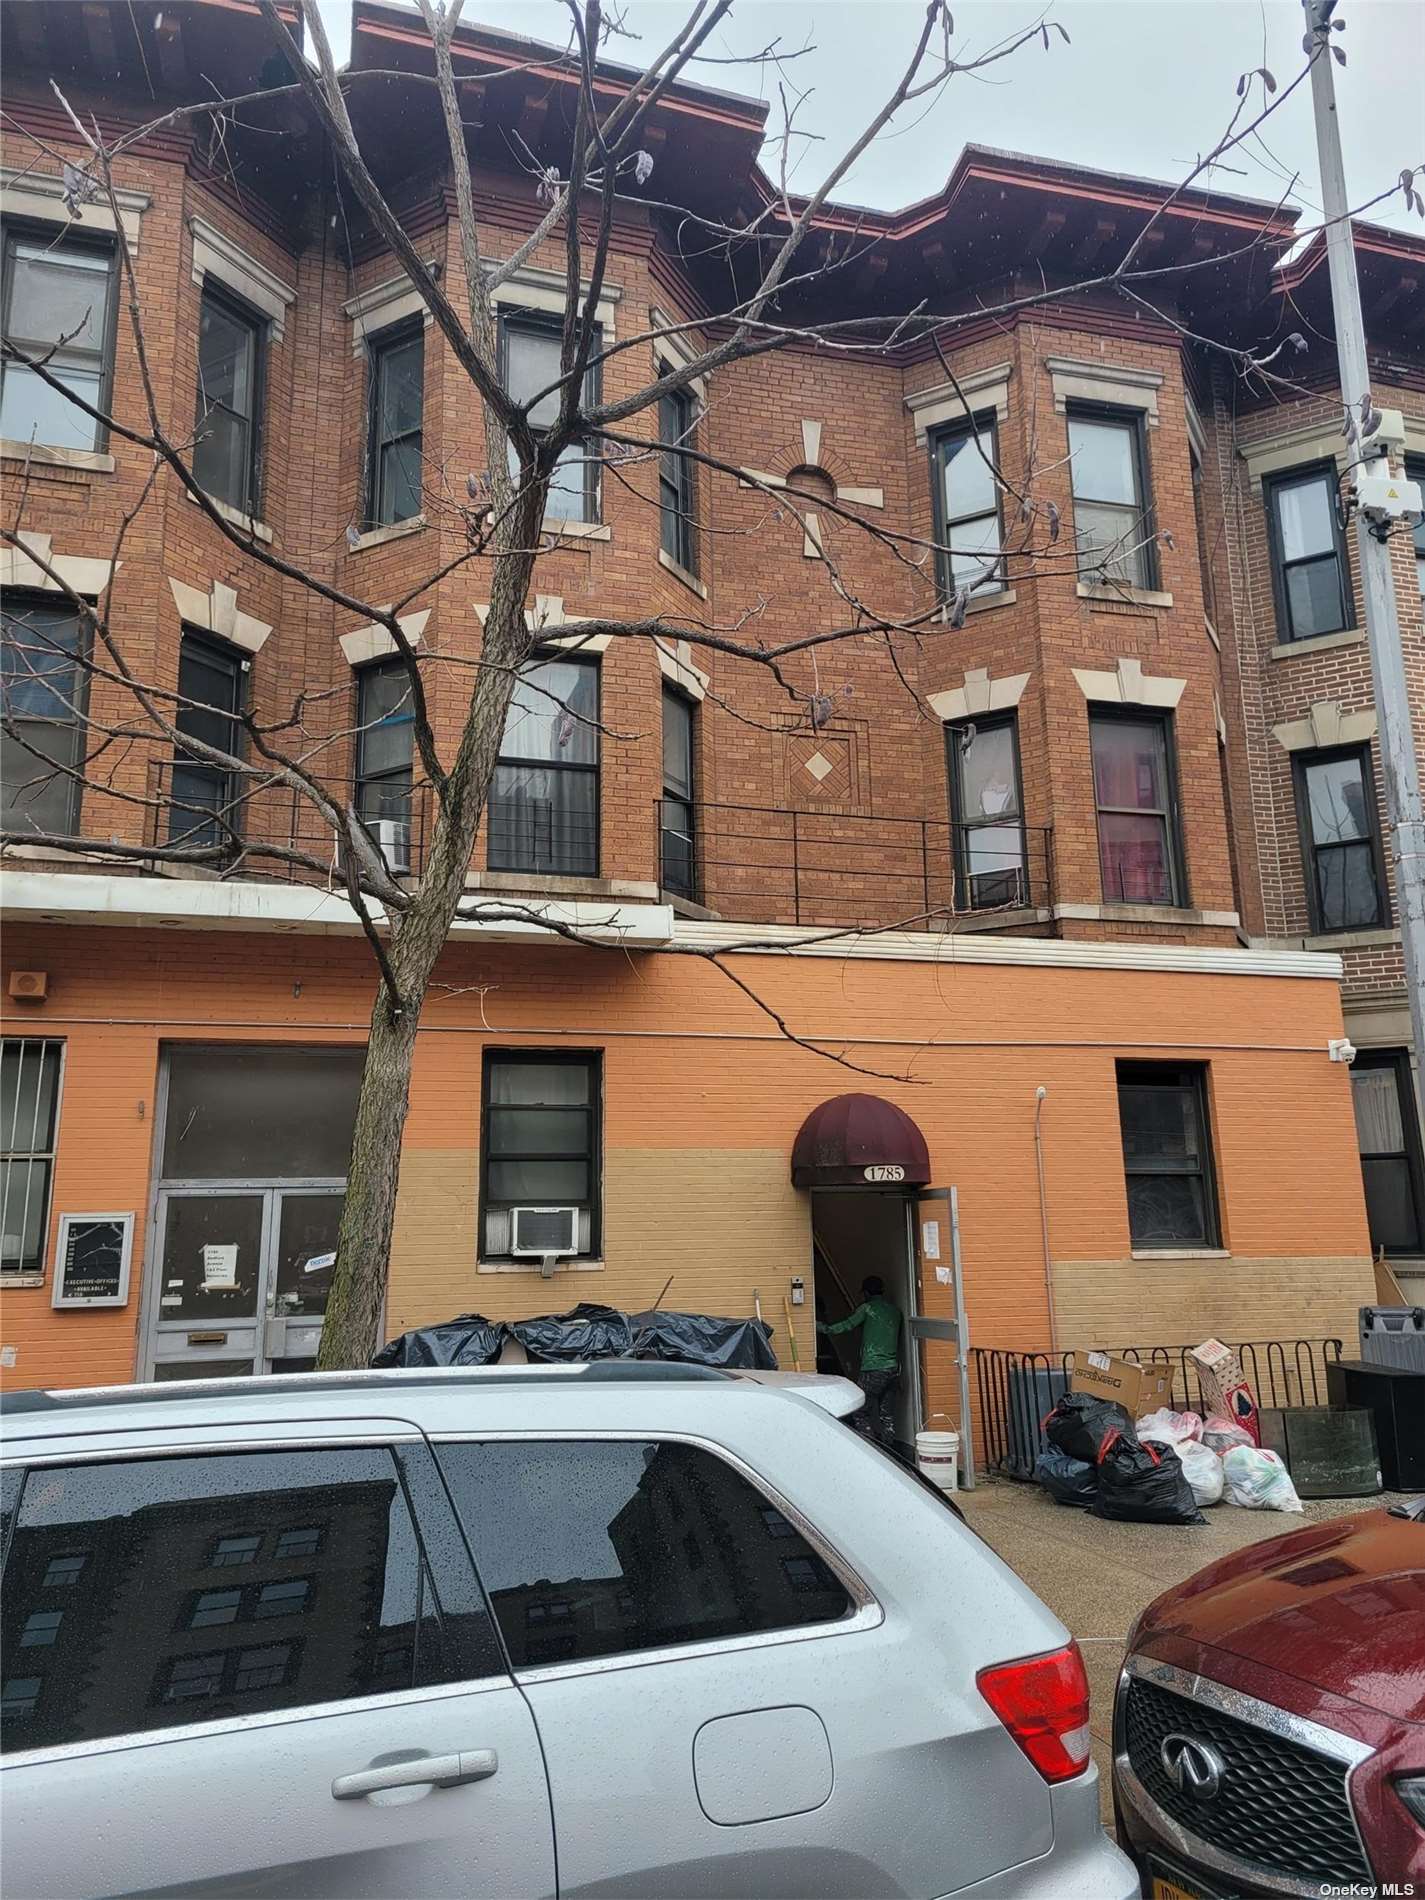 Apartment in Prospect Lefferts Gardens - Bedford  Brooklyn, NY 11225